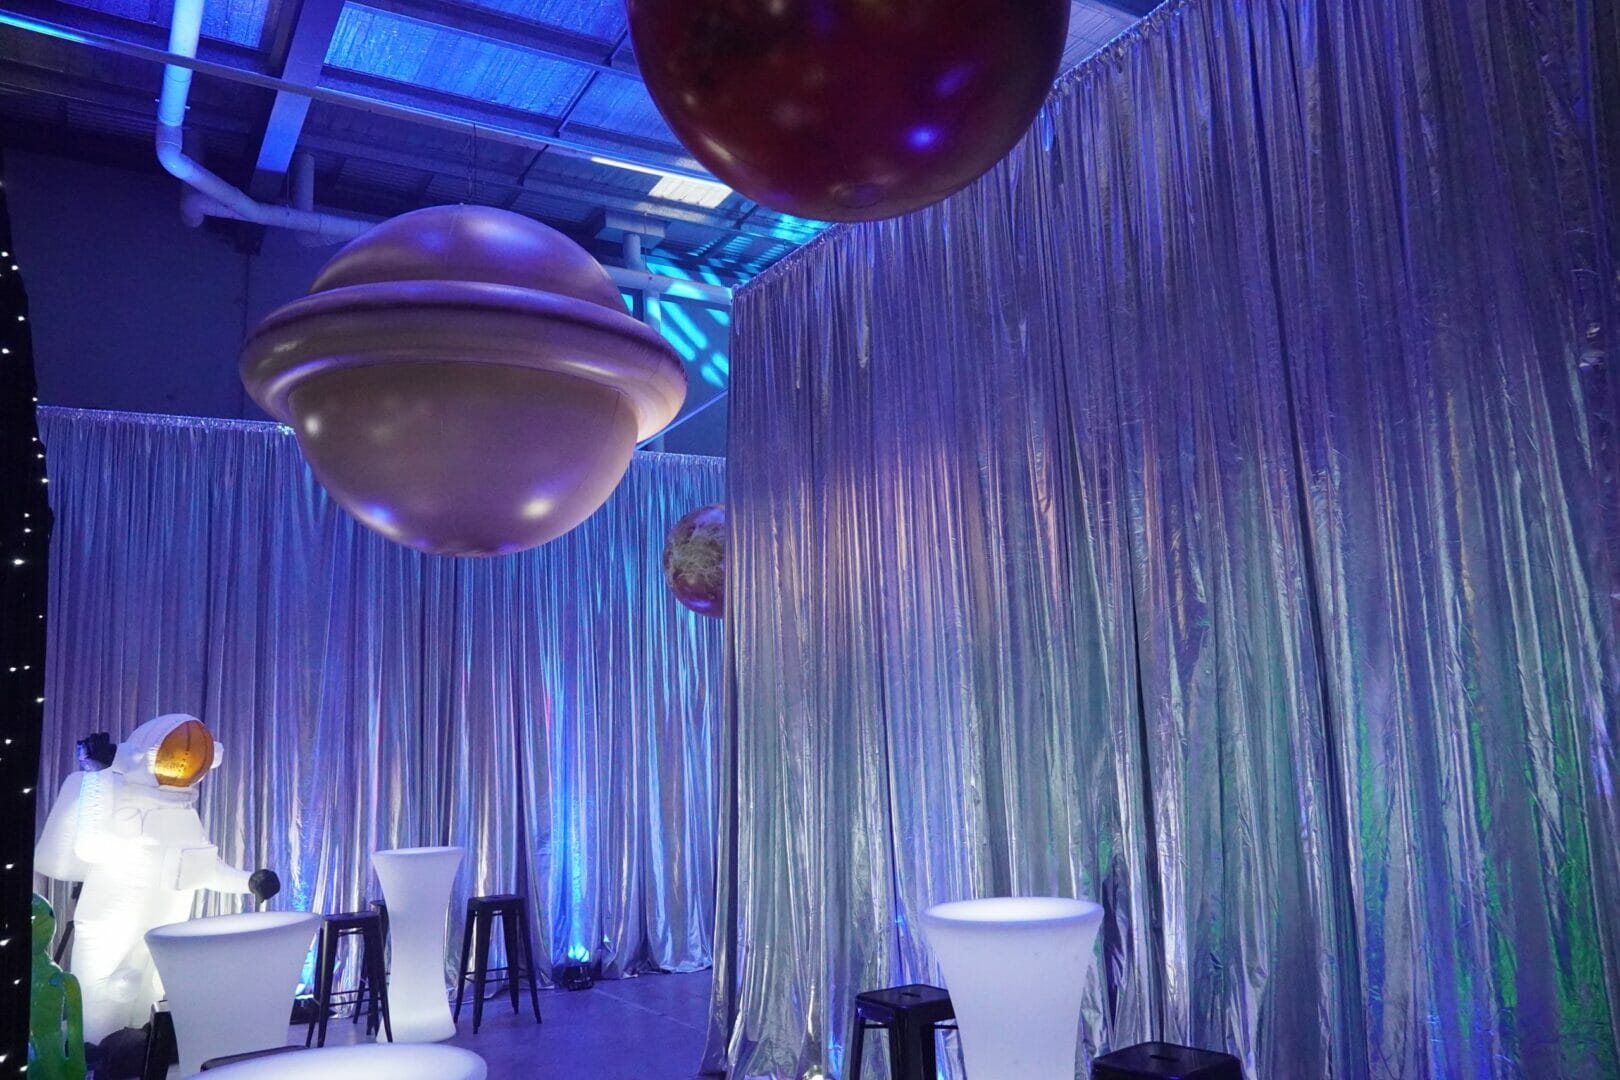 Silver metallic drape, inflatable planets, illuminated bar tables, and bar stools in a space themed party setup